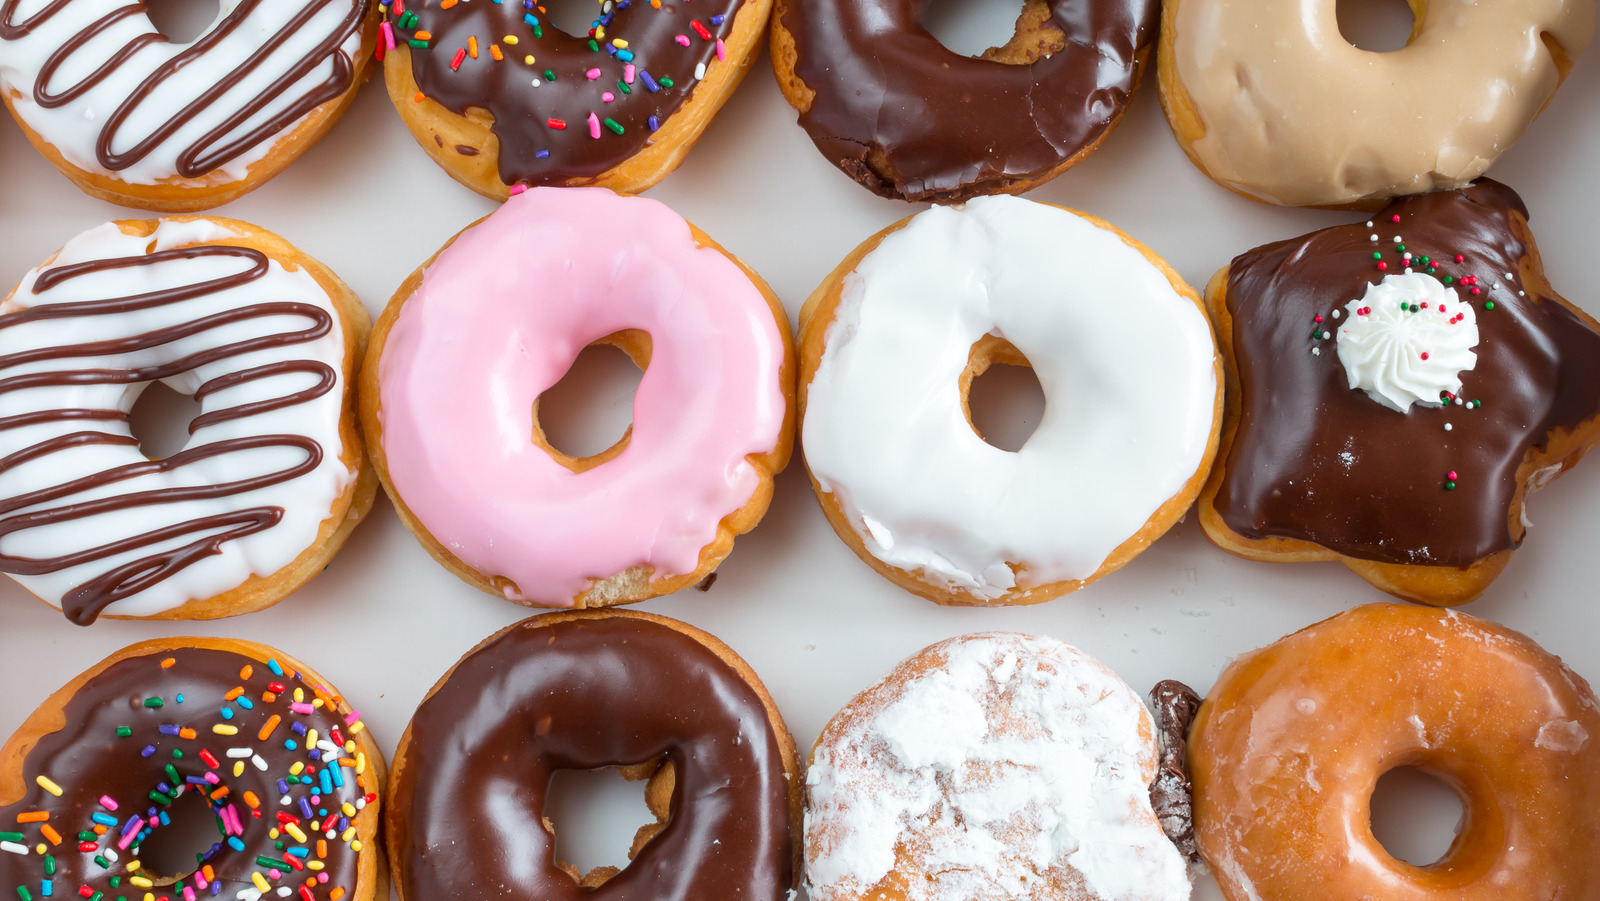 Discontinued Dunkin' Donuts Menu Items That Need To Make ...